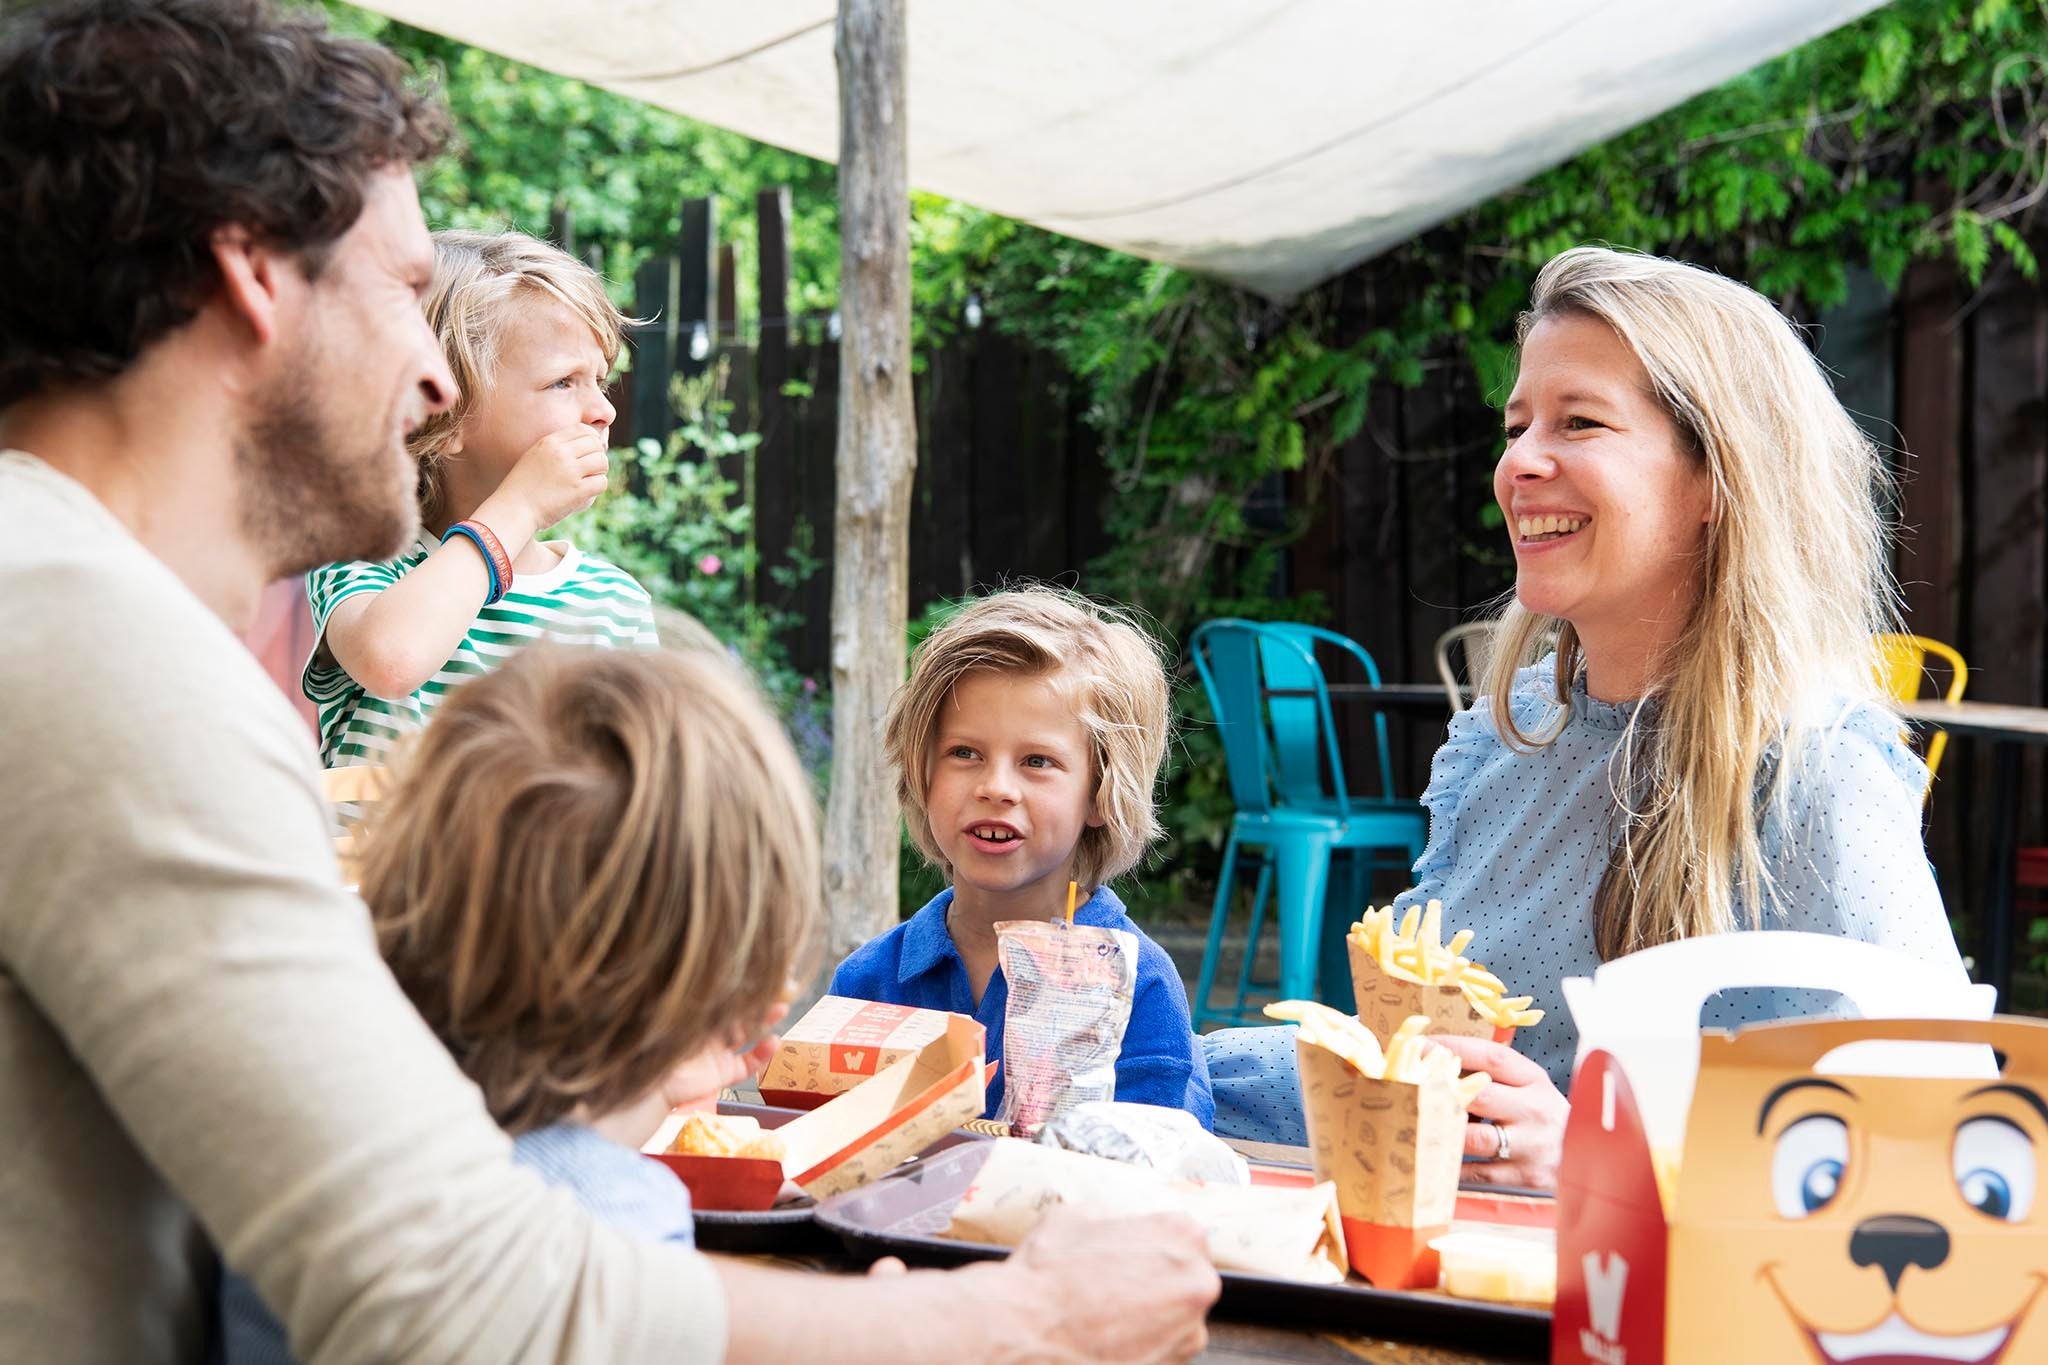 Grab a bite to eat with the whole family during a spectacular day out at Walibi Holland.